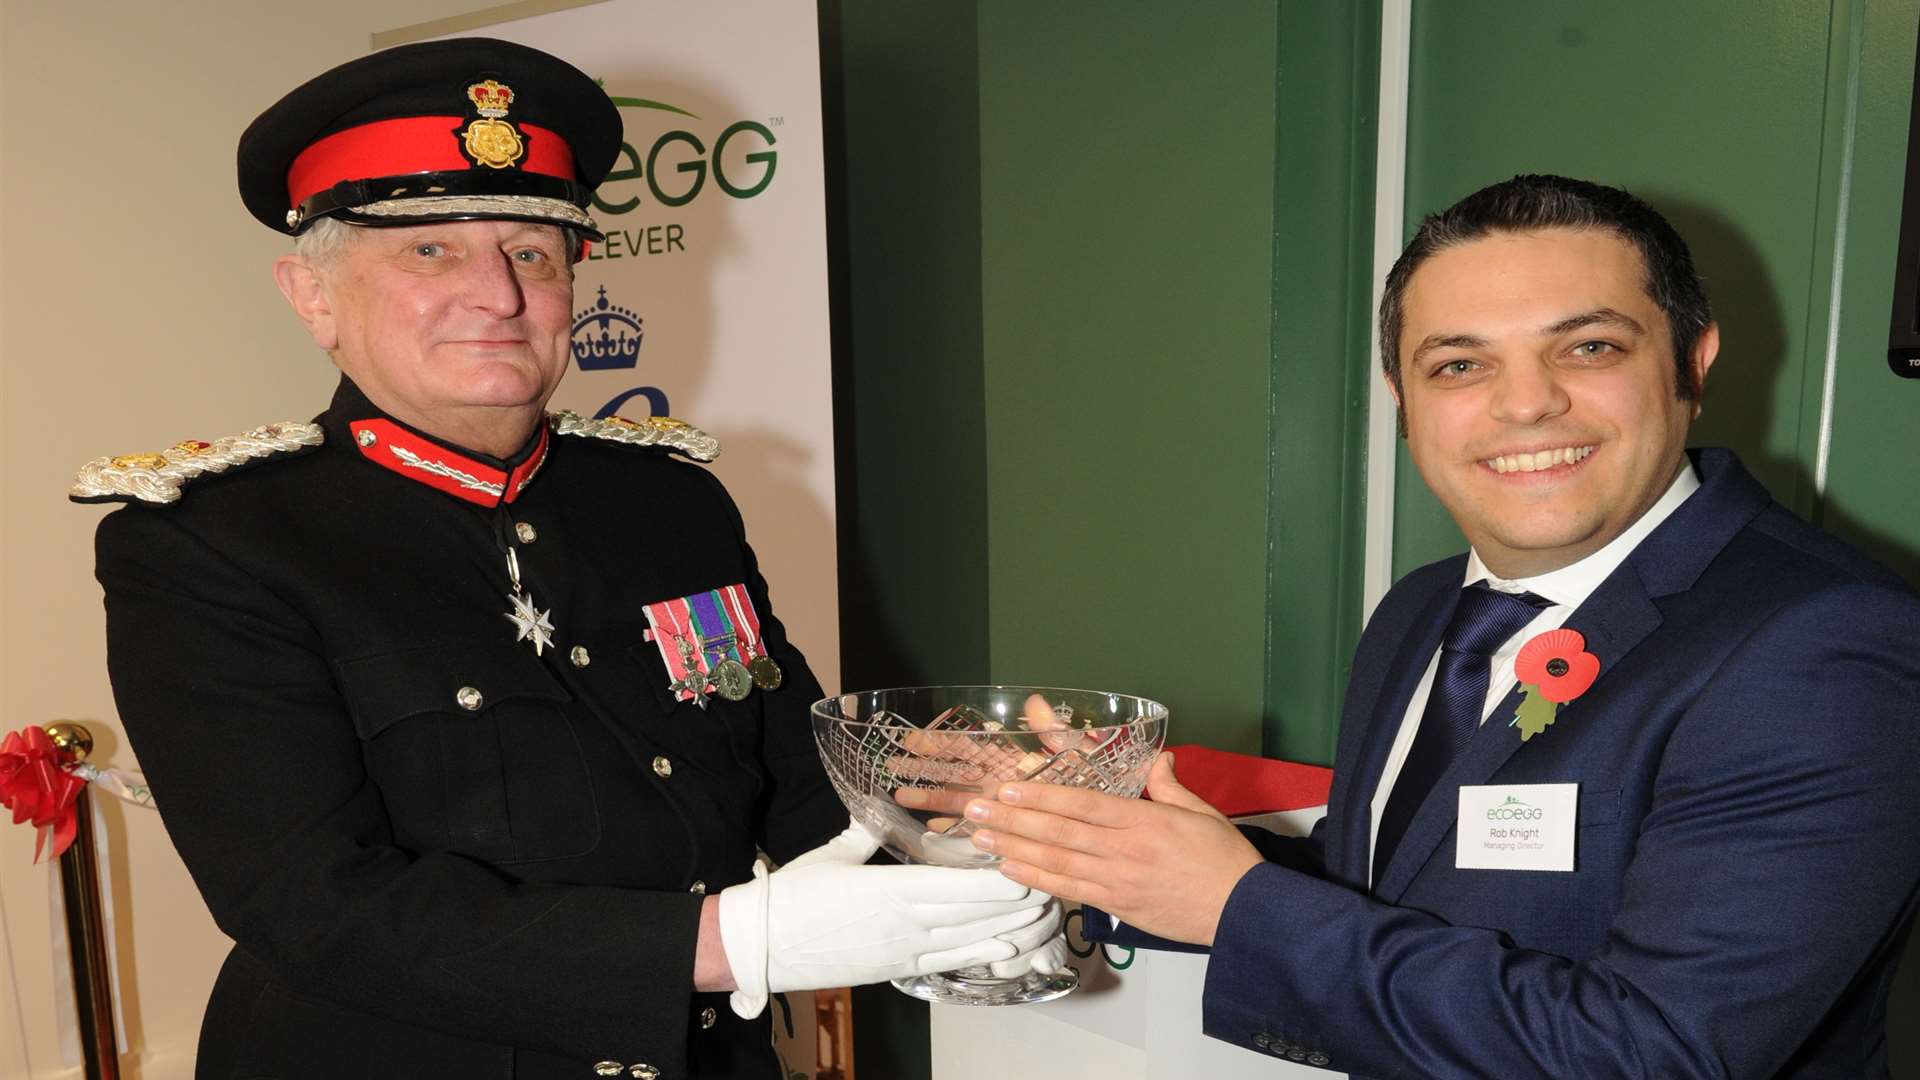 ecoegg director Rob Knight receives the award from the Lord Lieutenant Viscount De L'Isle